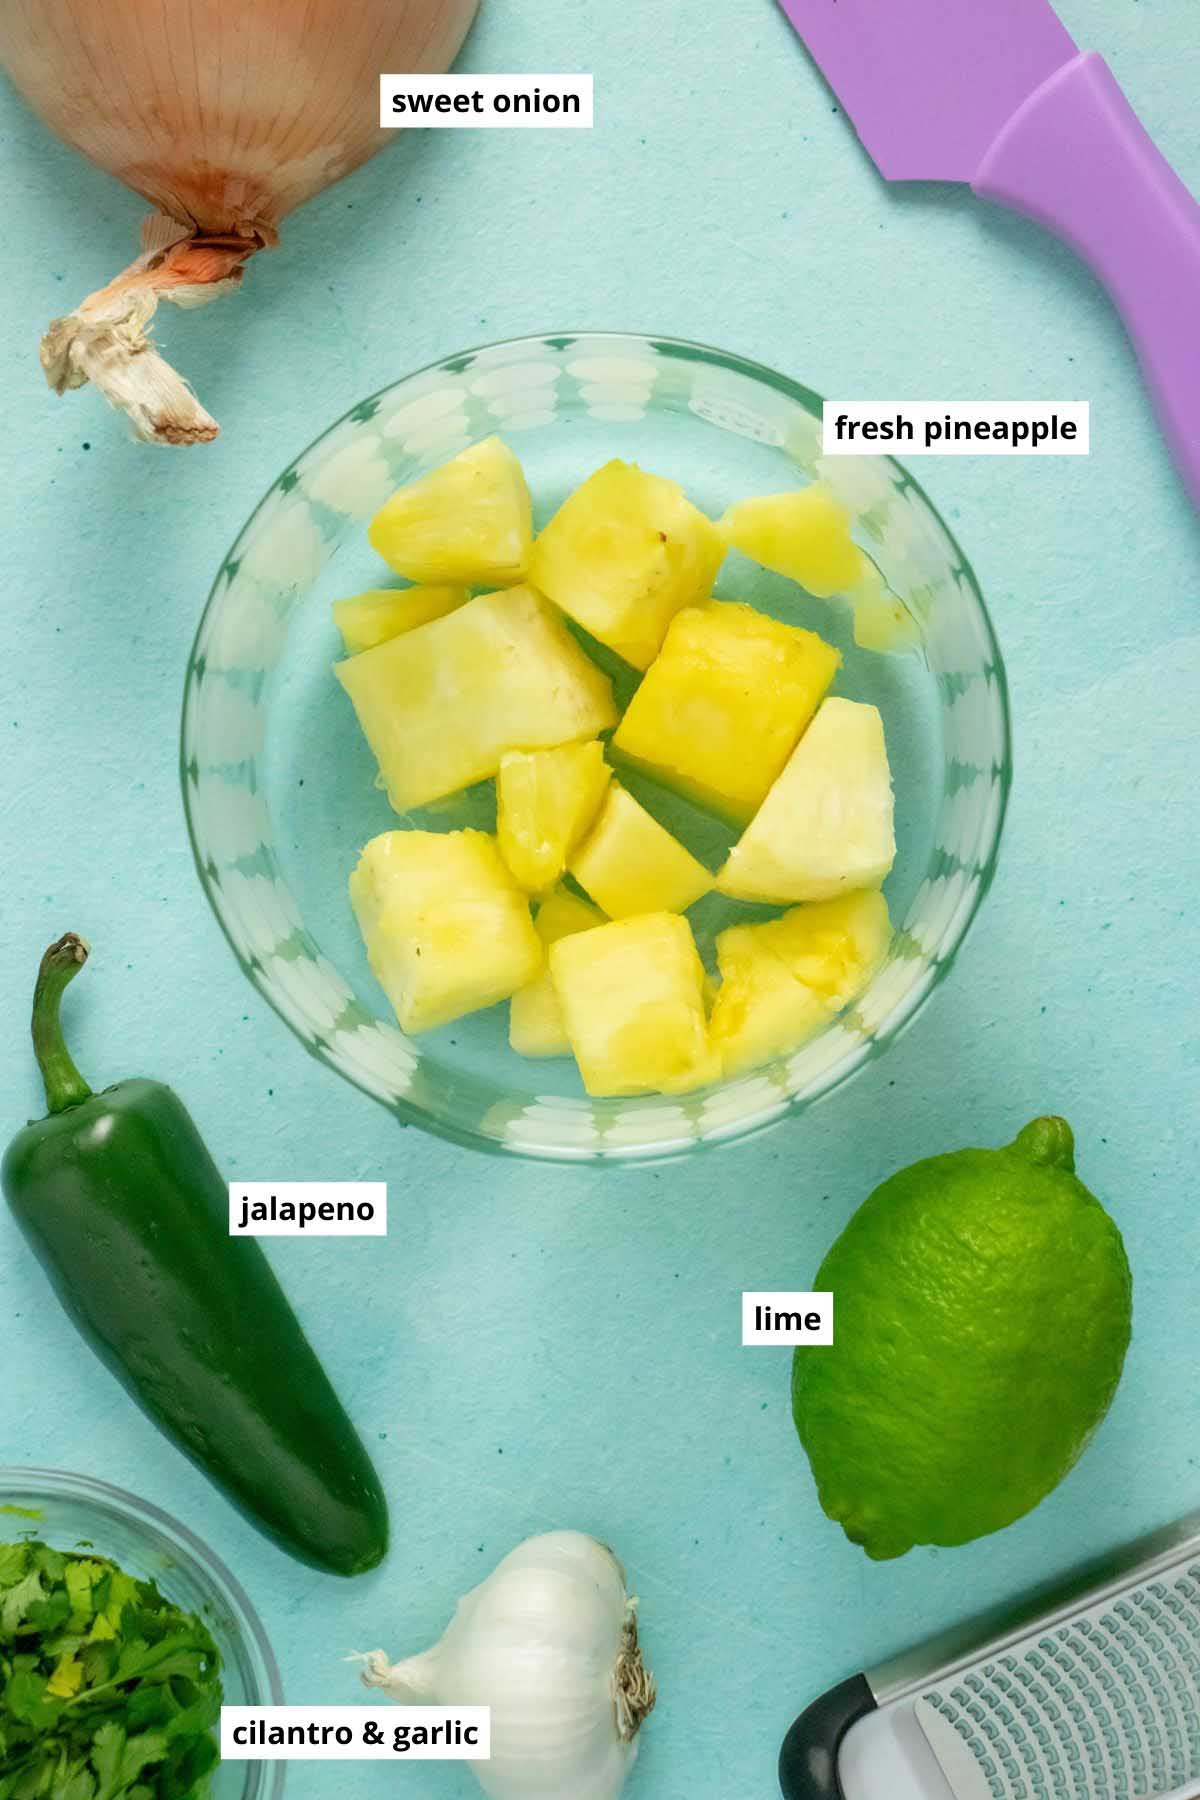 pineapple, jalapeño, lime, garlic, cilantro, and onion on a blue table with text labels on each ingredient